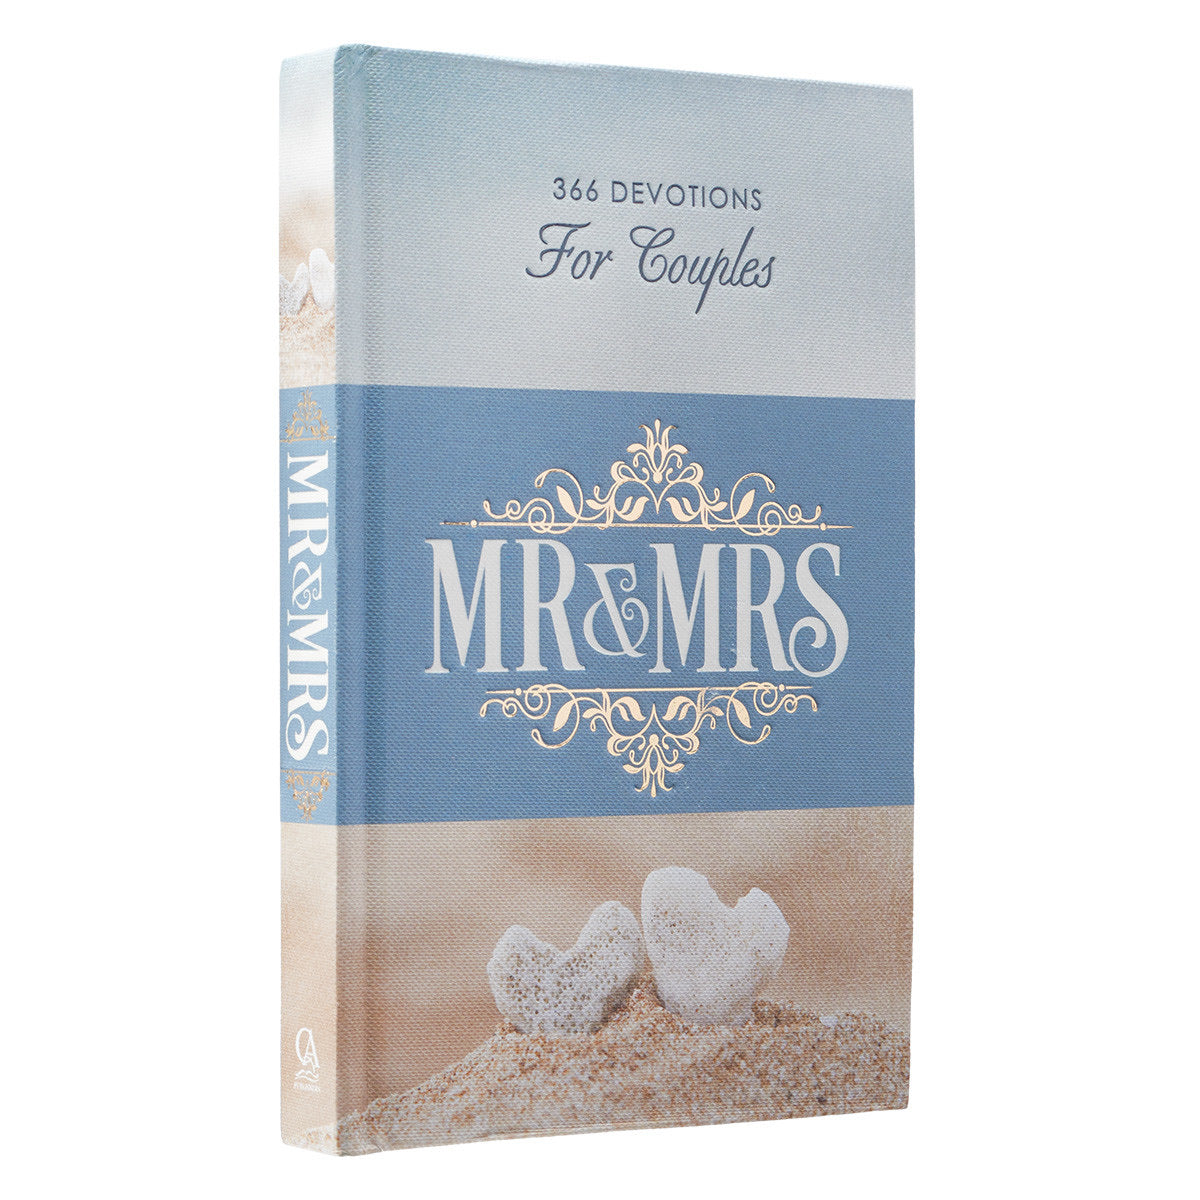 Devotional for Couples - Mr. & Mrs.